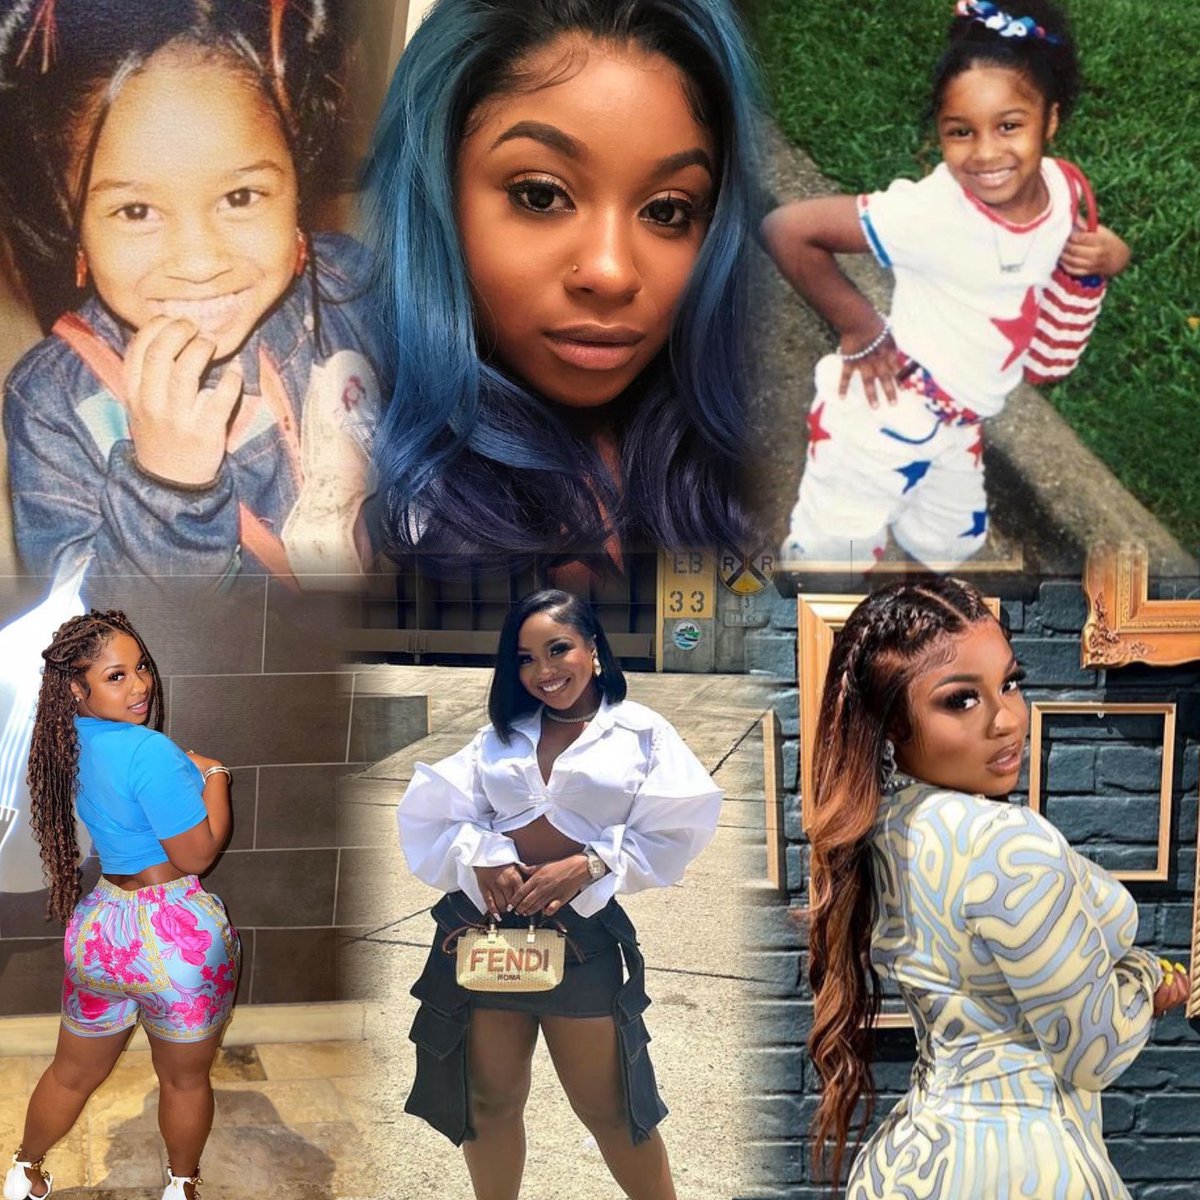 Gm morning queens day 6 of #Naevember is fav hairstyle Nae wakes up on violence and kills any hairstyle.@reginae_carter1 your strength is amazing🙏🏾 your light will continue to shine🌟#29daysofnae #bob #locs #ponytails on baby Nae and #sewins we even more lit🔥 this day forward ♥️